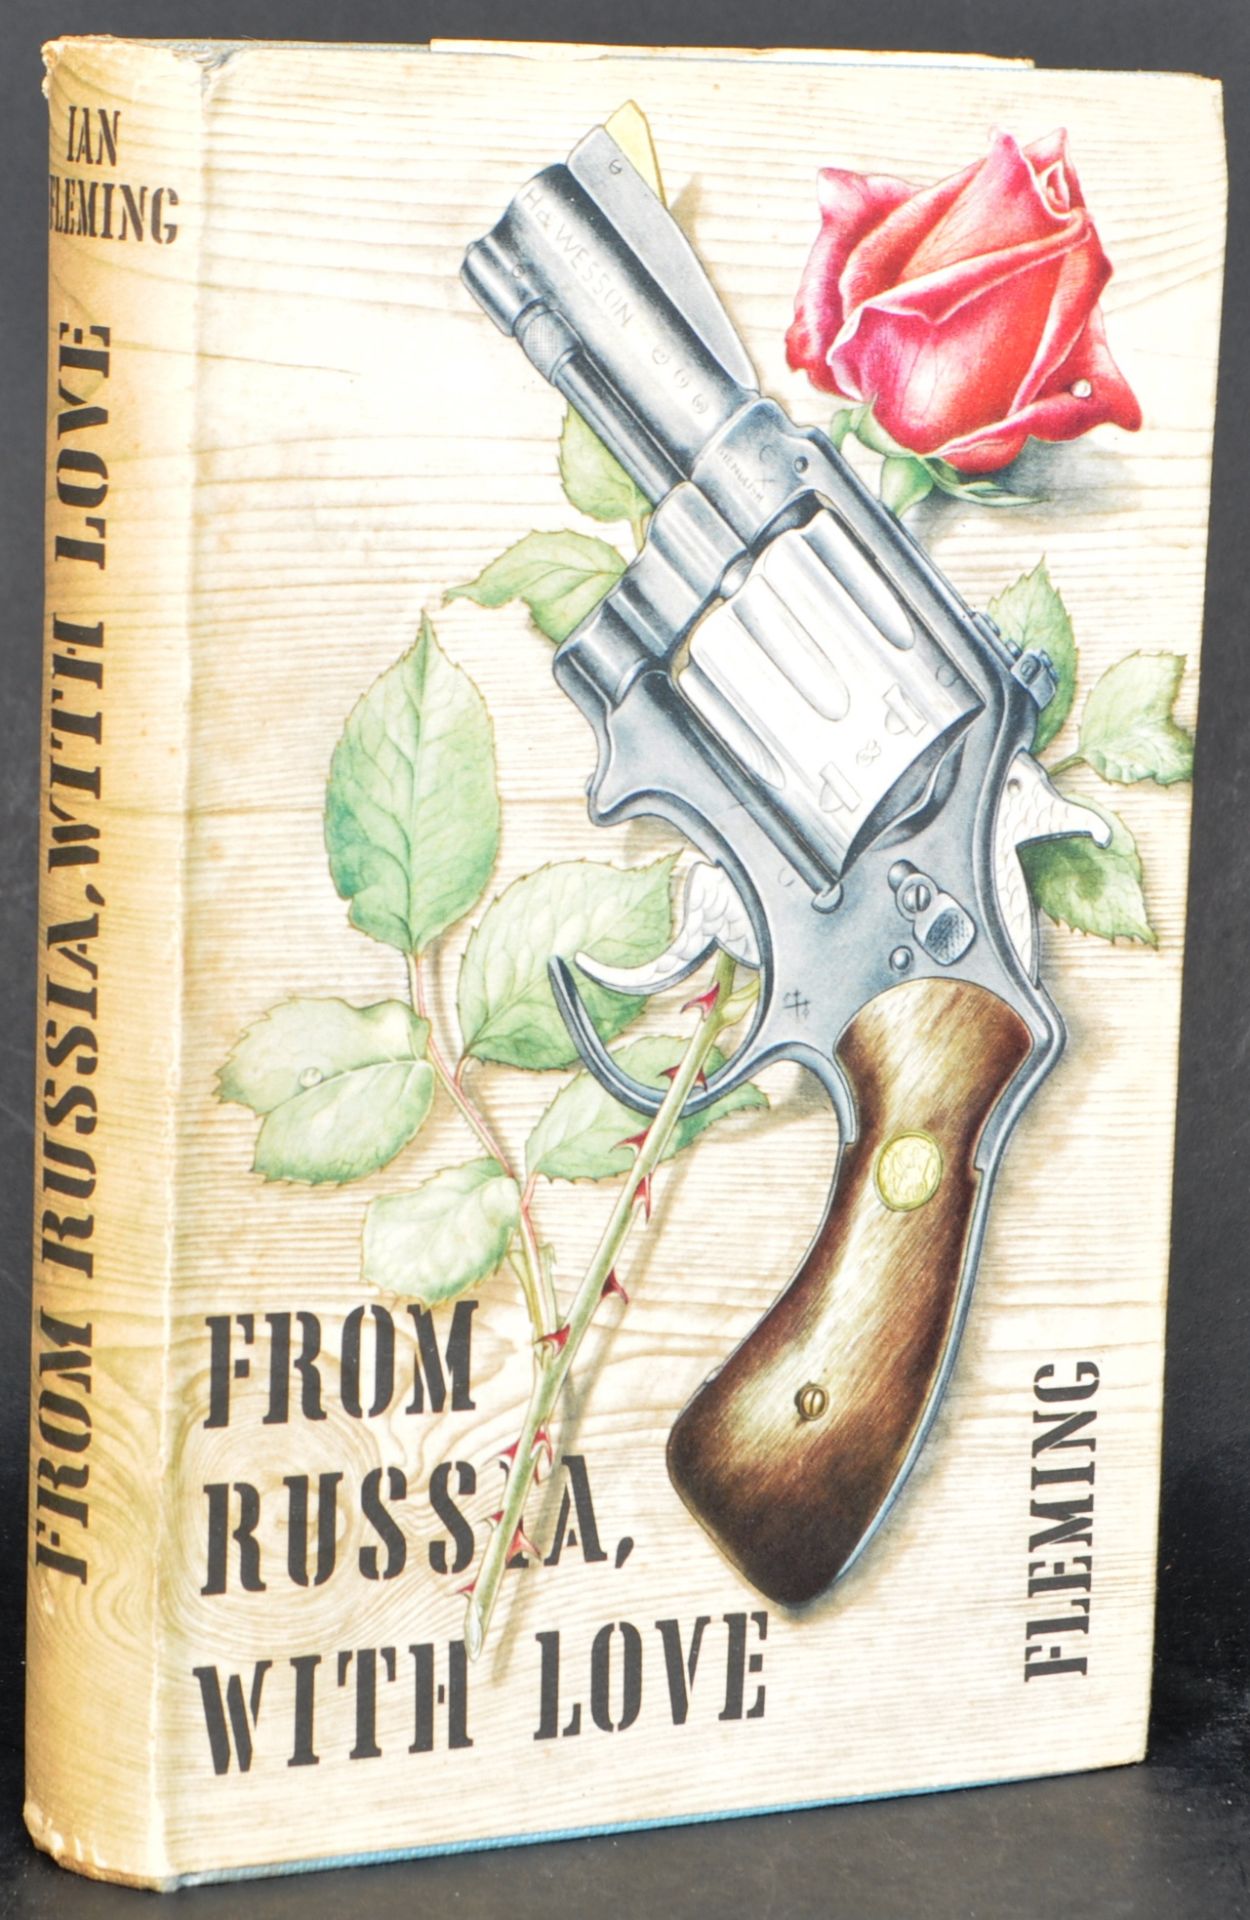 FLEMING - FROM RUSSIA WITH LOVE - 007 JAMES BOND BOOK